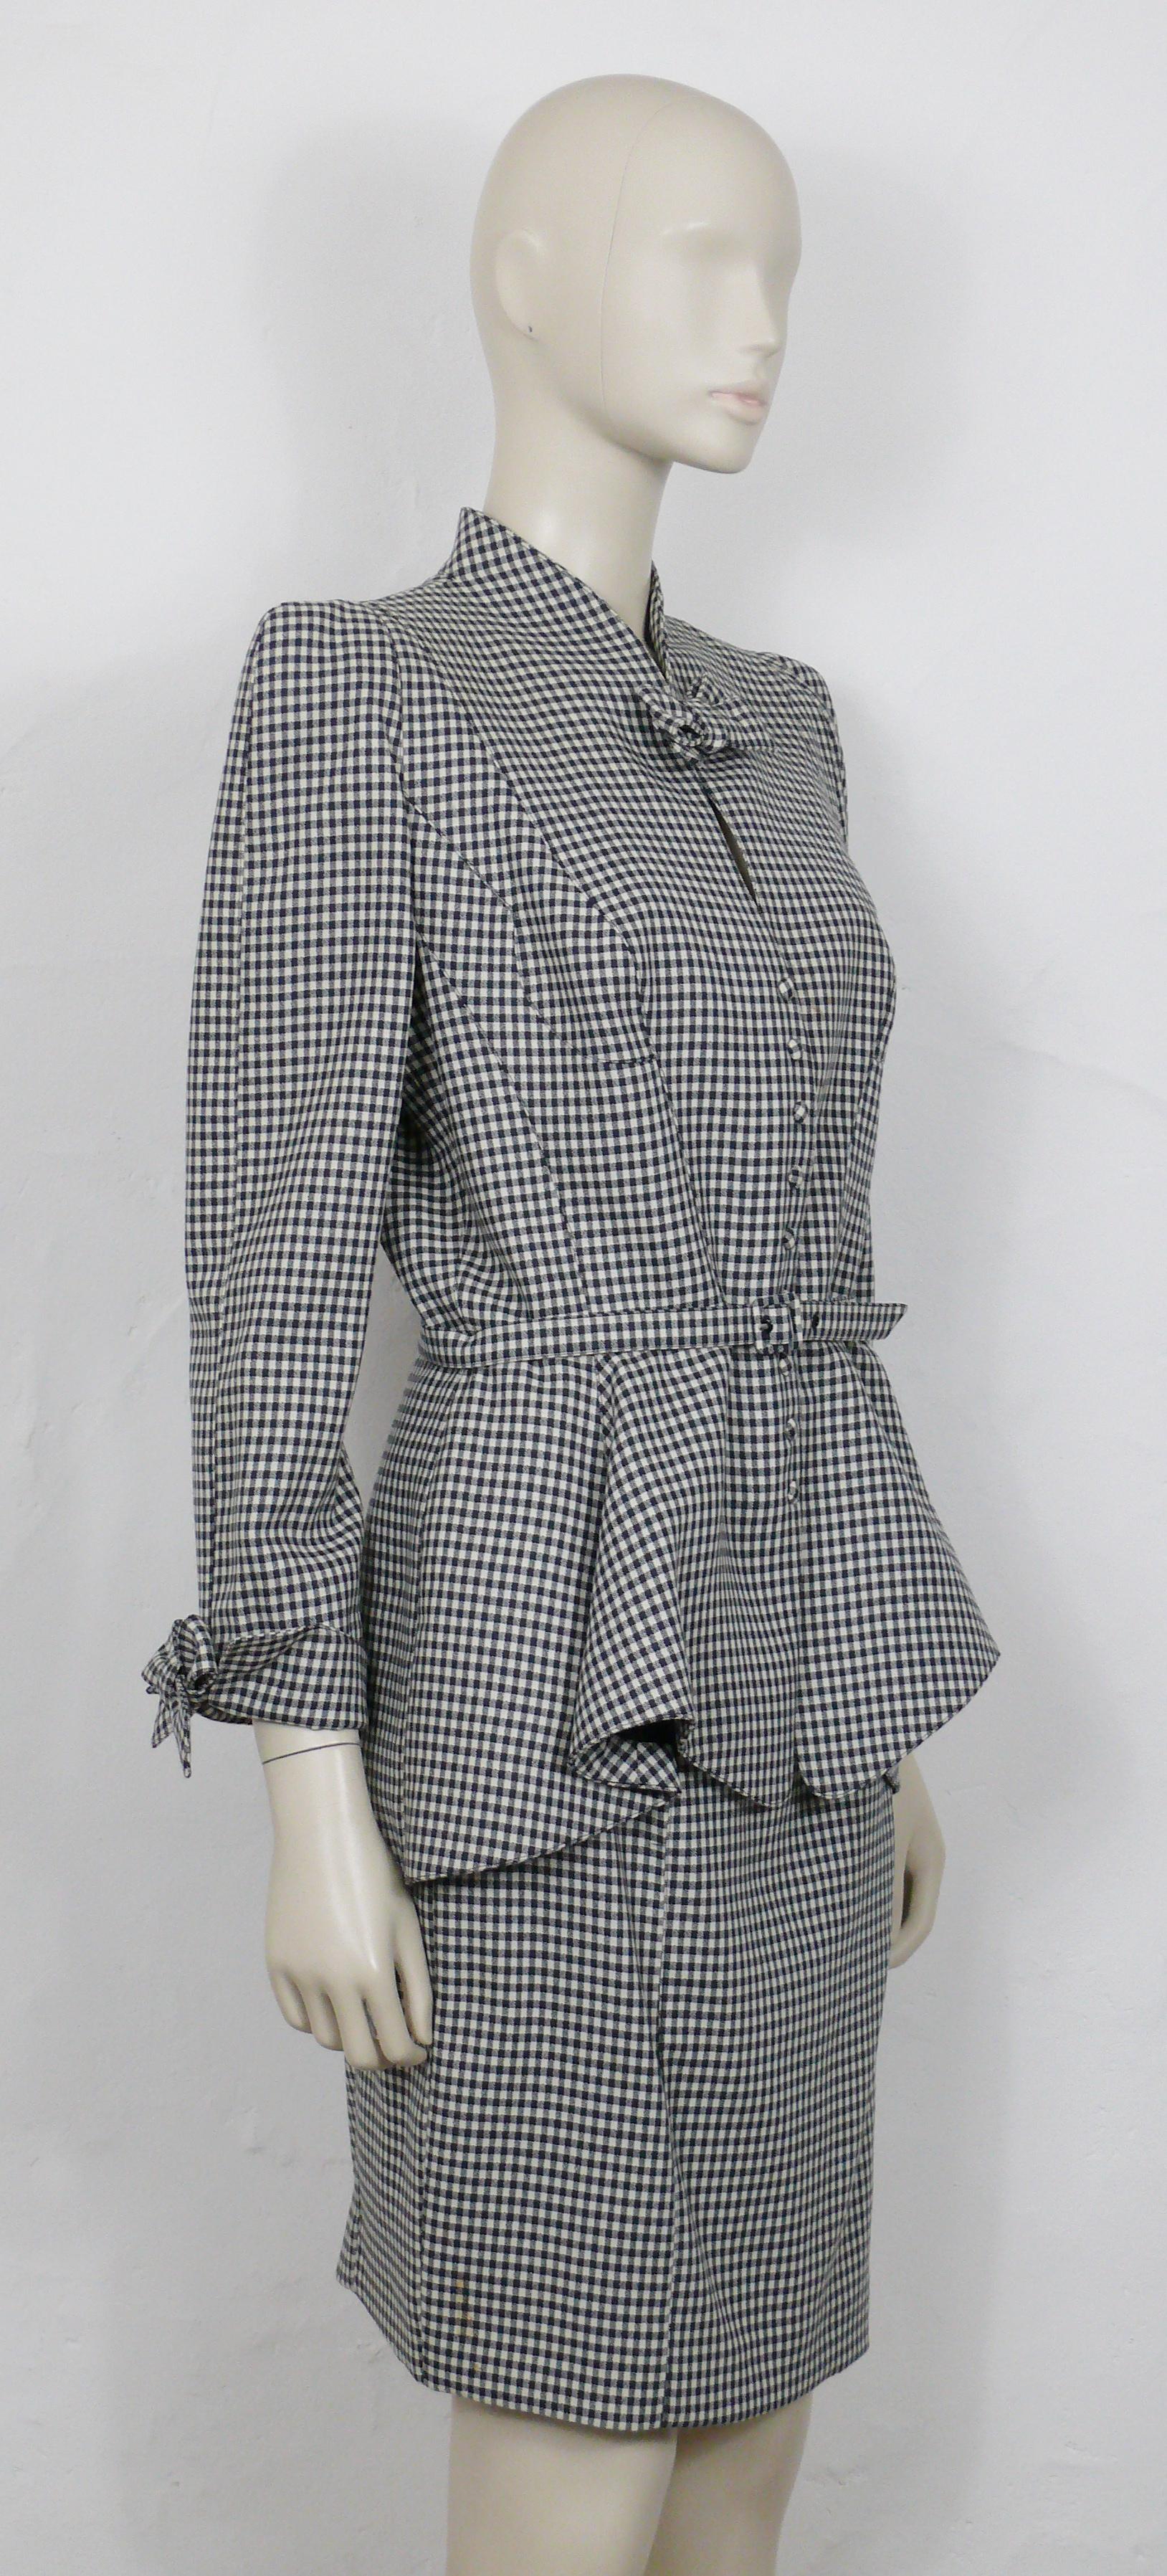 THIERRY MUGLER vintage black gingham print worsted wool skirt suit.

JACKET features :
- Typical MUGLER's cut and tailoring with basque.
- Structured shoulders.
- Bow details on bust and both cuffs.
- Snap down snap button closure at the front.
-